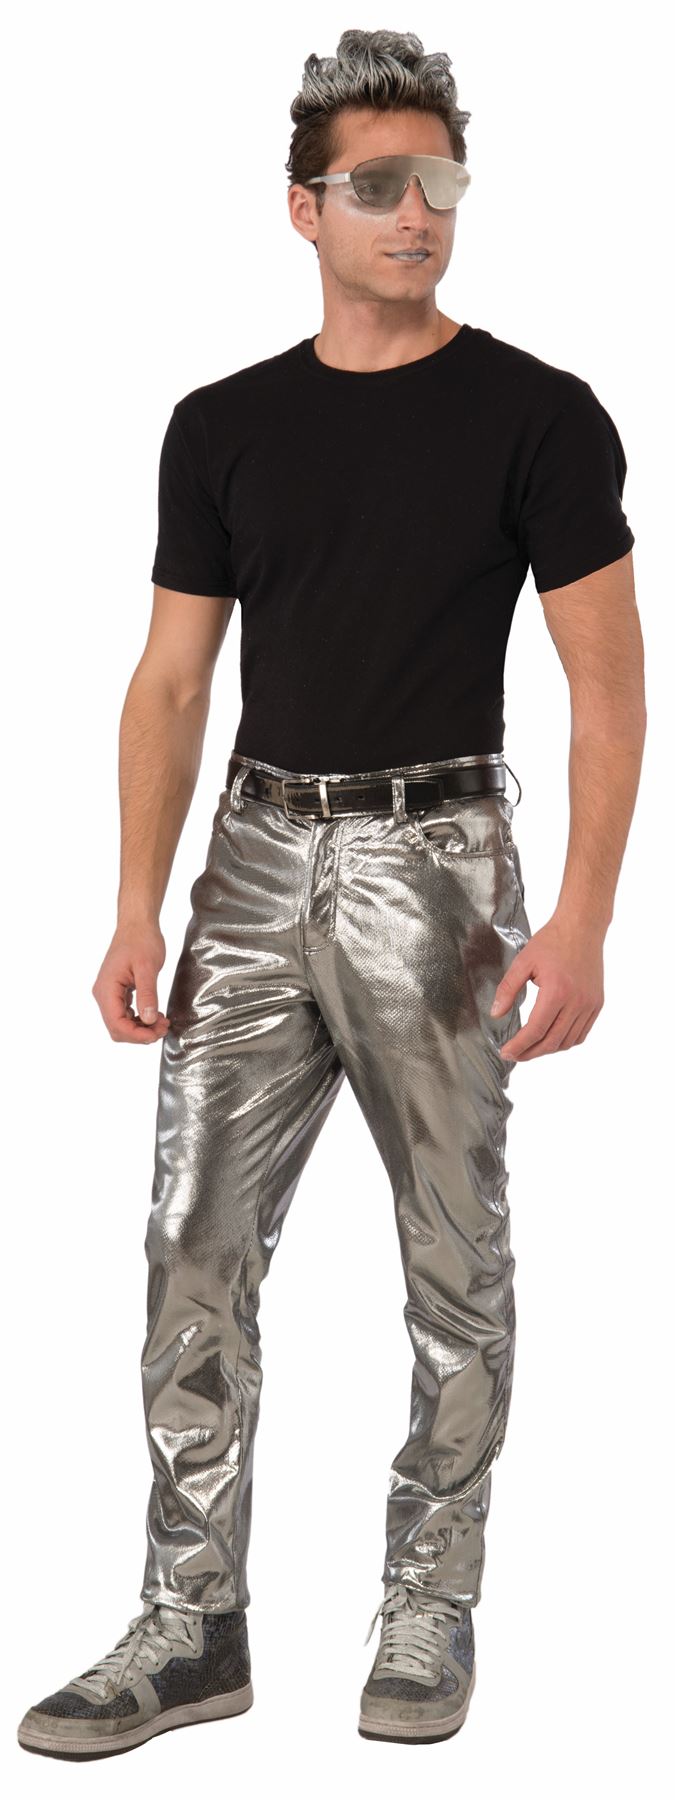 Todd & Margo Shiny Silver Workout Top and Pants